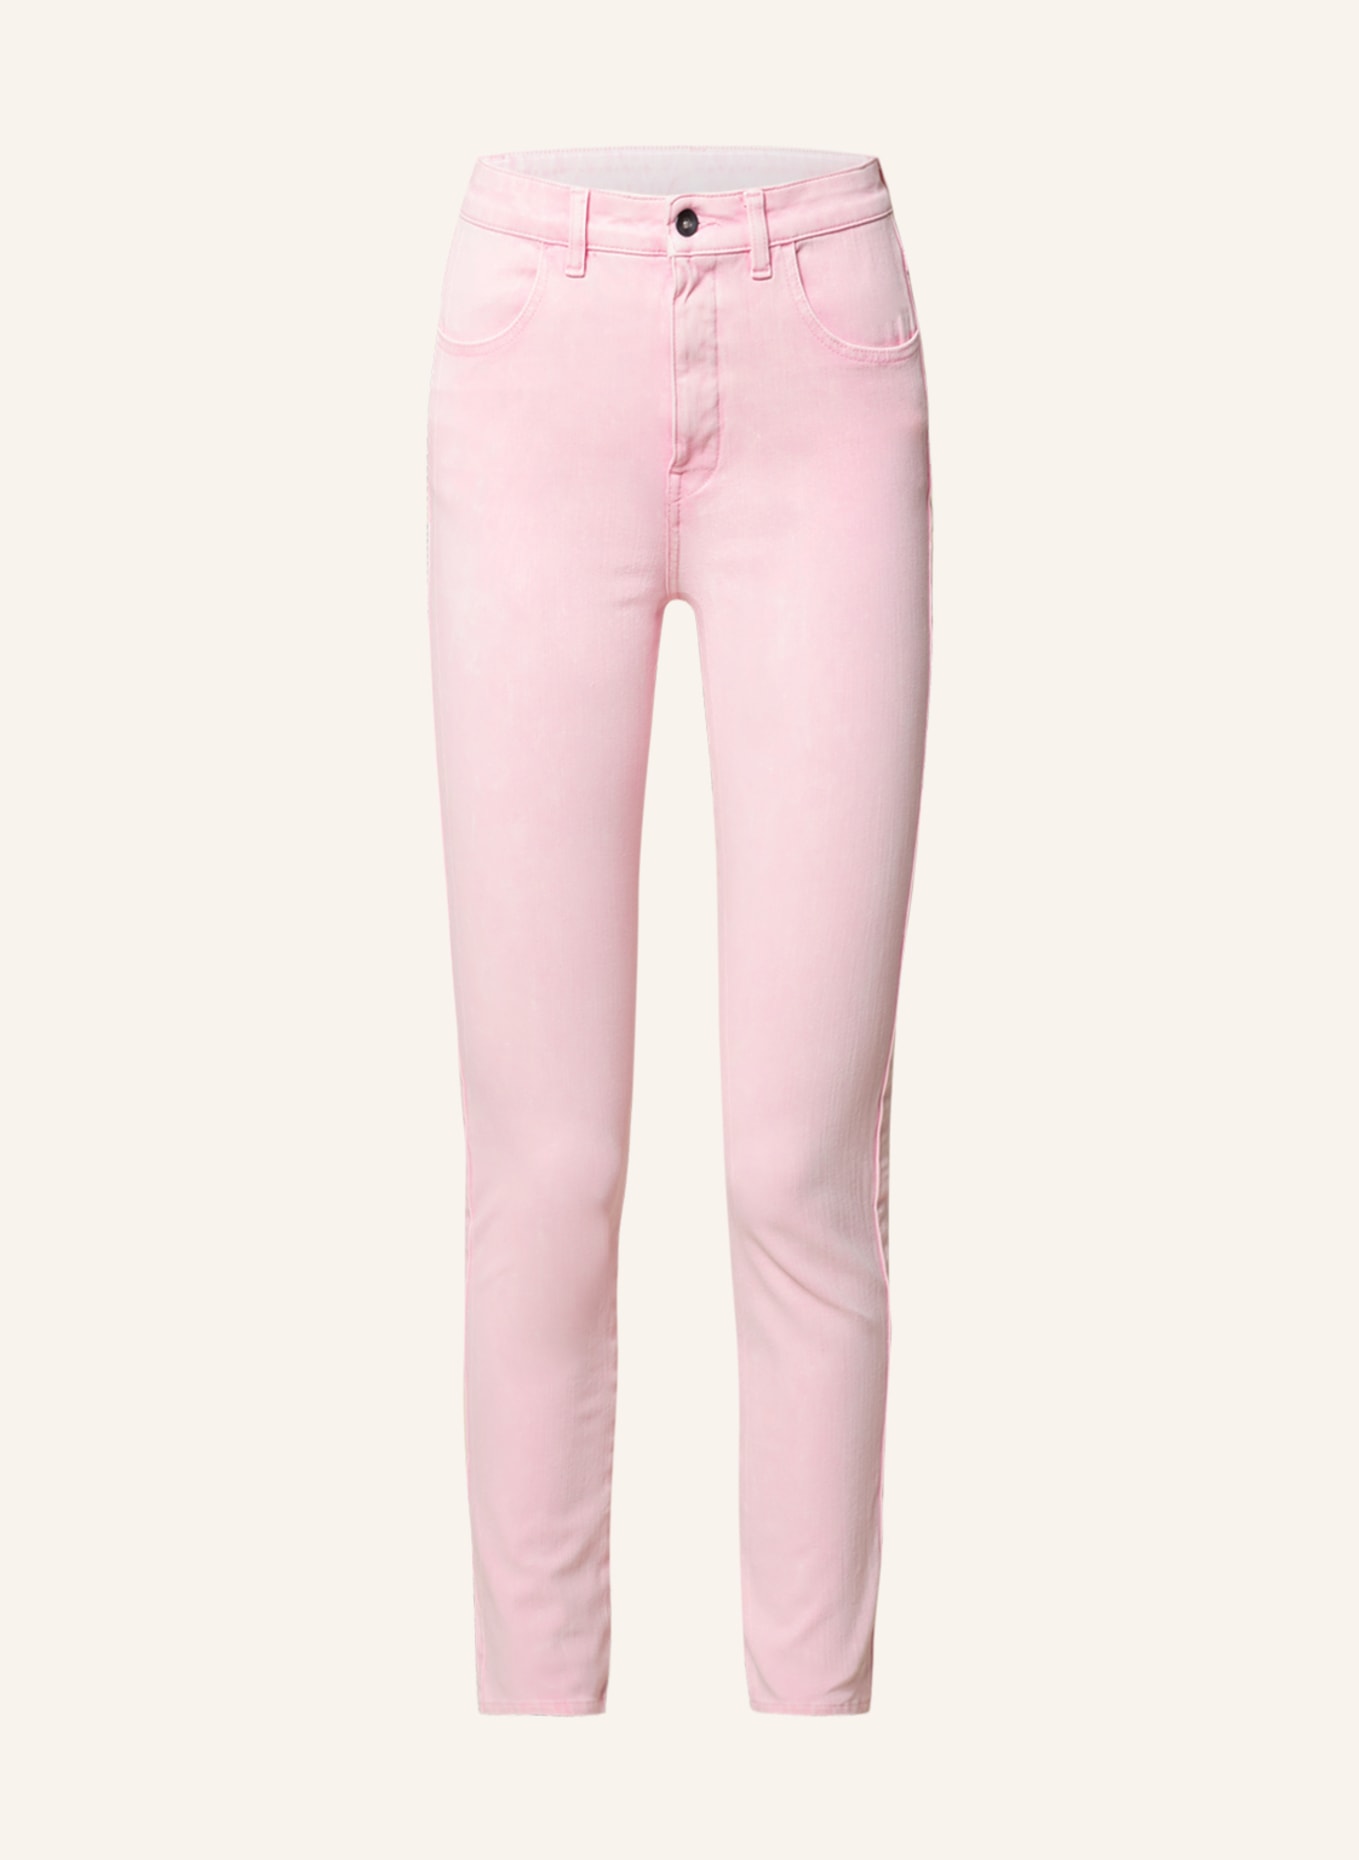 ITEM m6 Flared Jeans mit Shaping-Effekt, Farbe: 753 washed out pink (Bild 1)